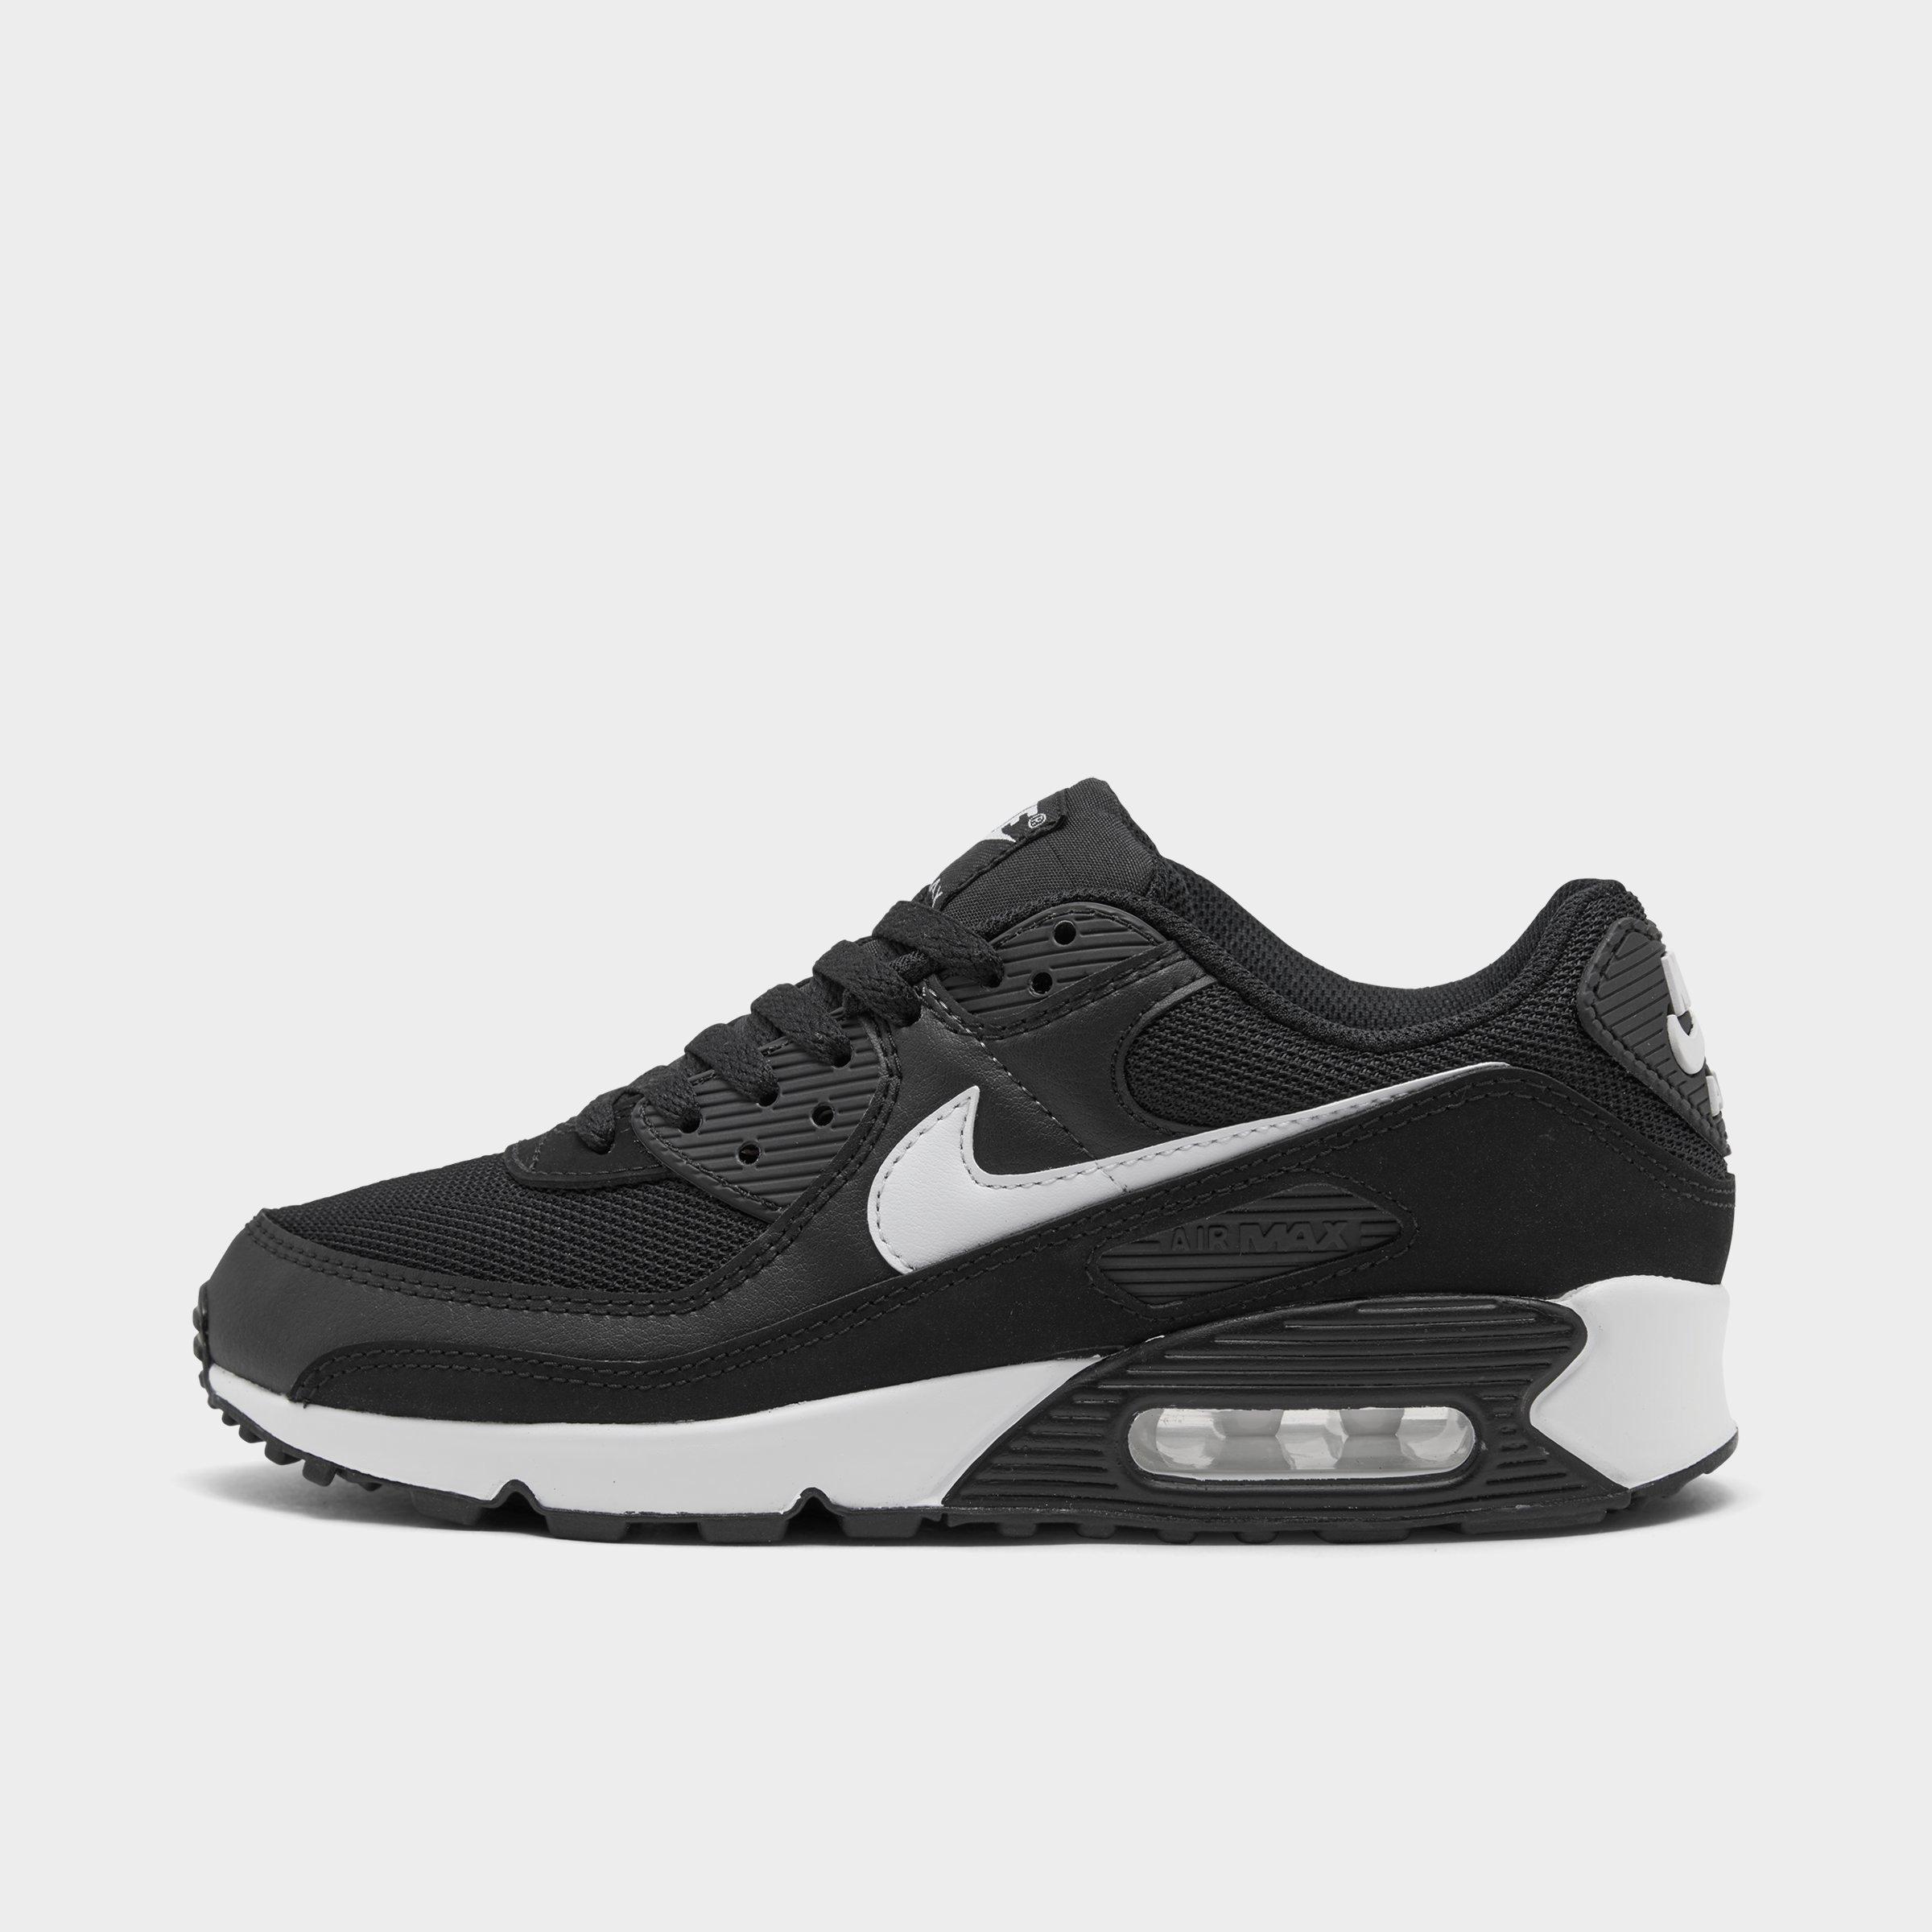 nike air max 90 womens shoes all black leather special